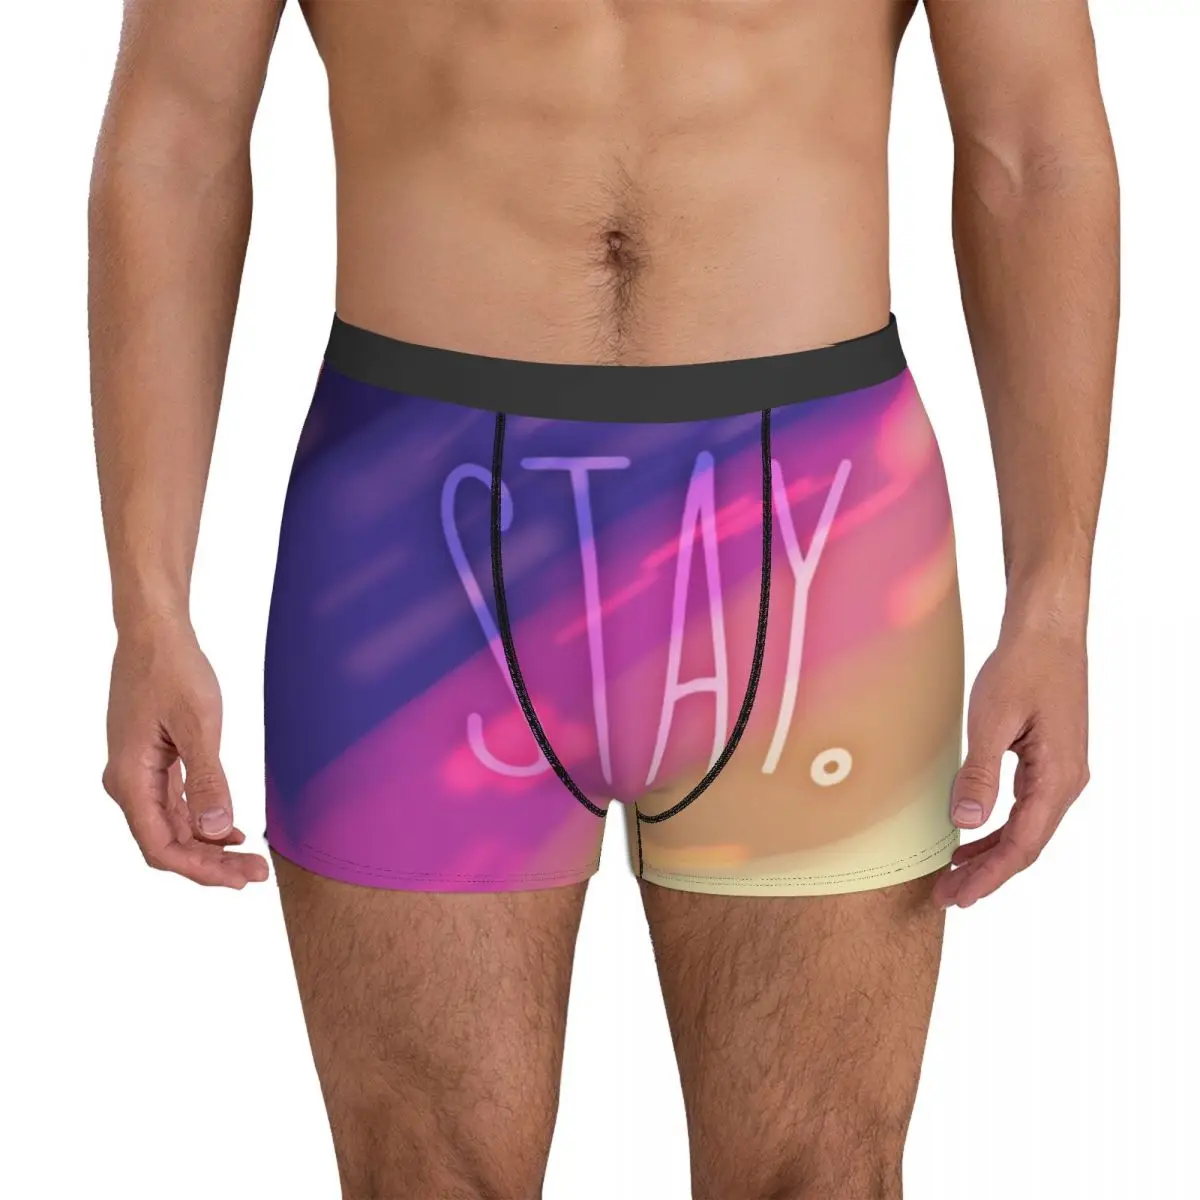 Stay Album Cover Art Design Underwear color fun word song hot Men Panties Printing Funny Boxershorts High Quality Boxer Brief